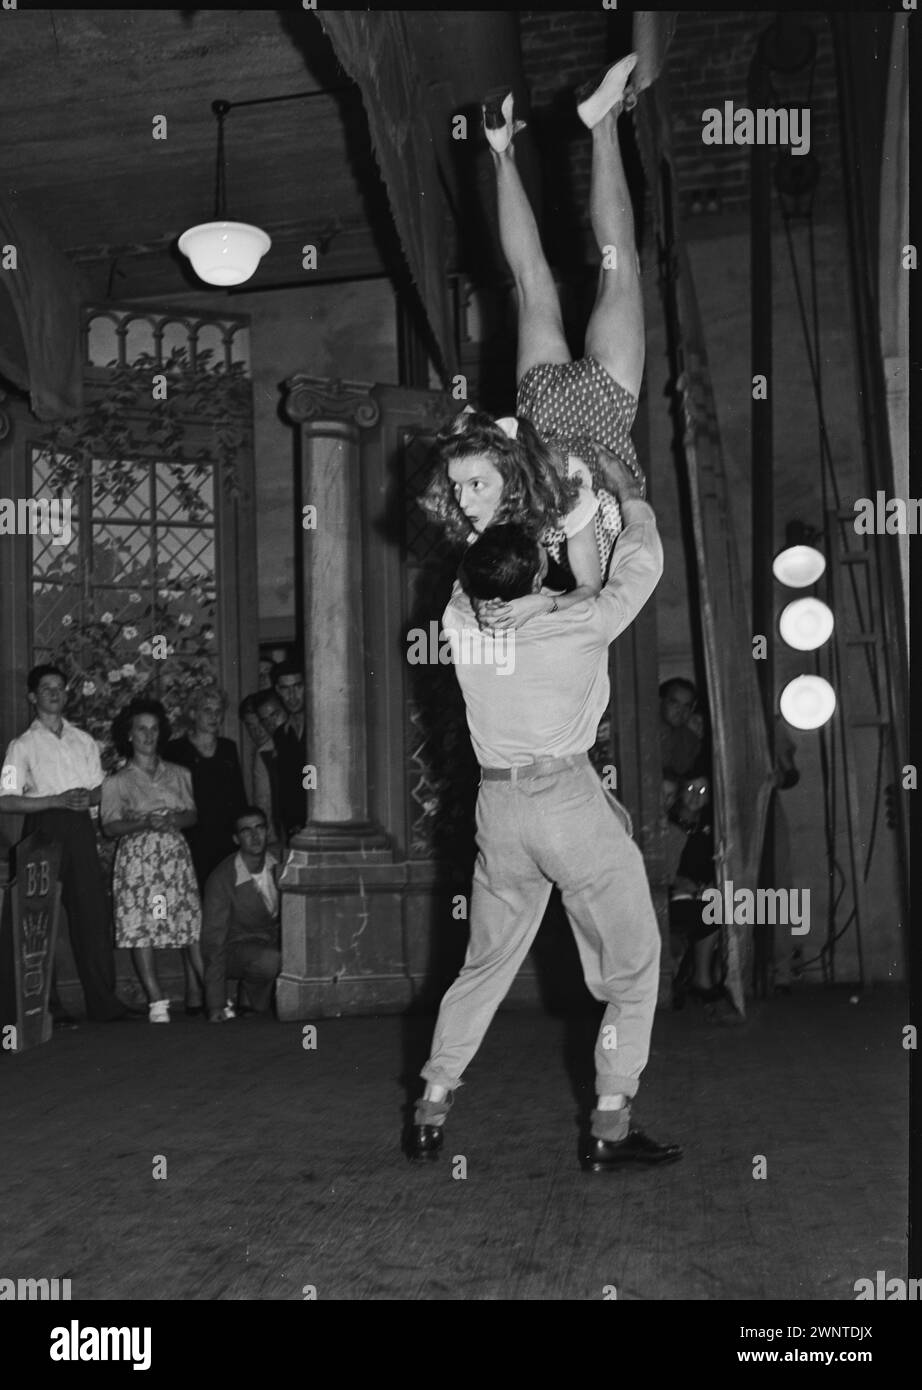 Sydney, Australia. February 1948 competion for Jitterbugs at Trocadero.  Male dancer throwing female partner in the air. Stock Photo